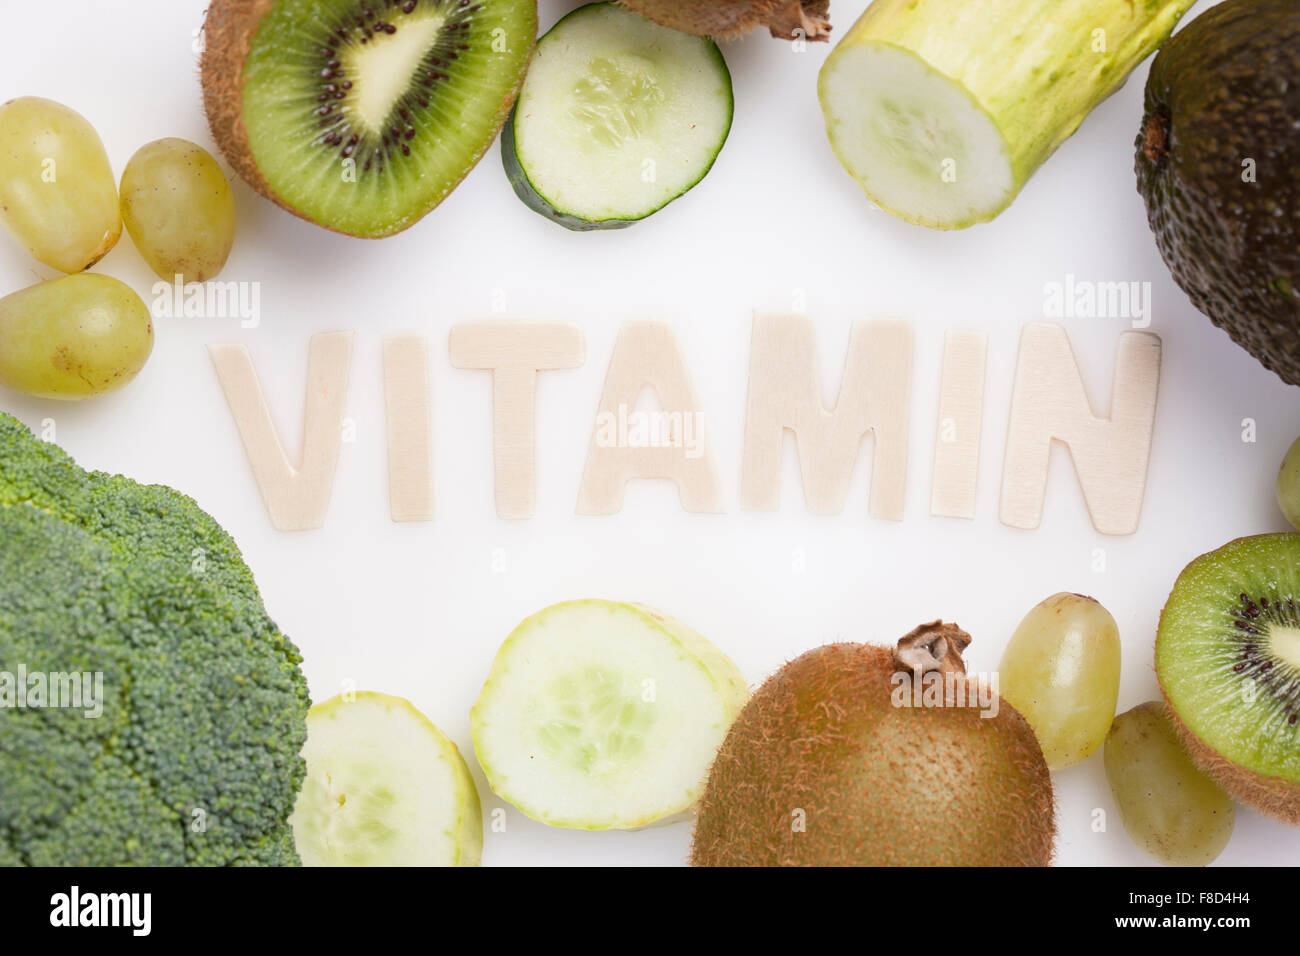 Solid word VITAMIN surrounded by green color of vegetables and fruits Stock Photo